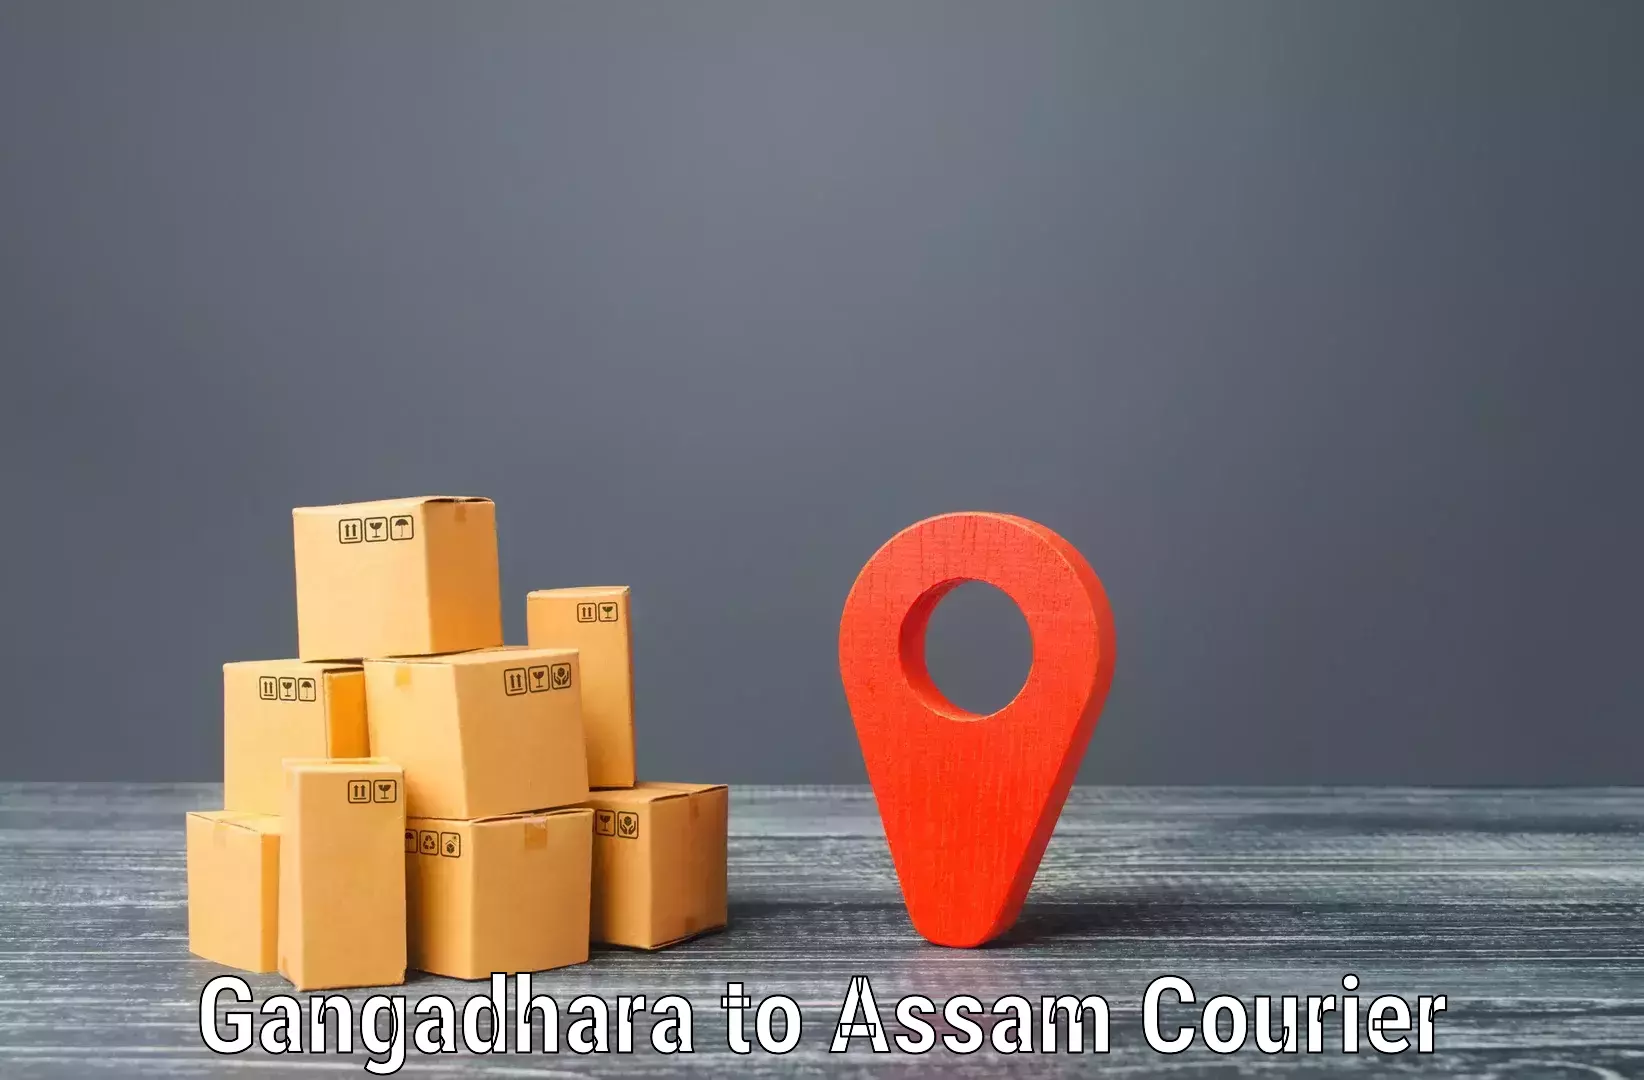 Tailored delivery services Gangadhara to Lala Assam